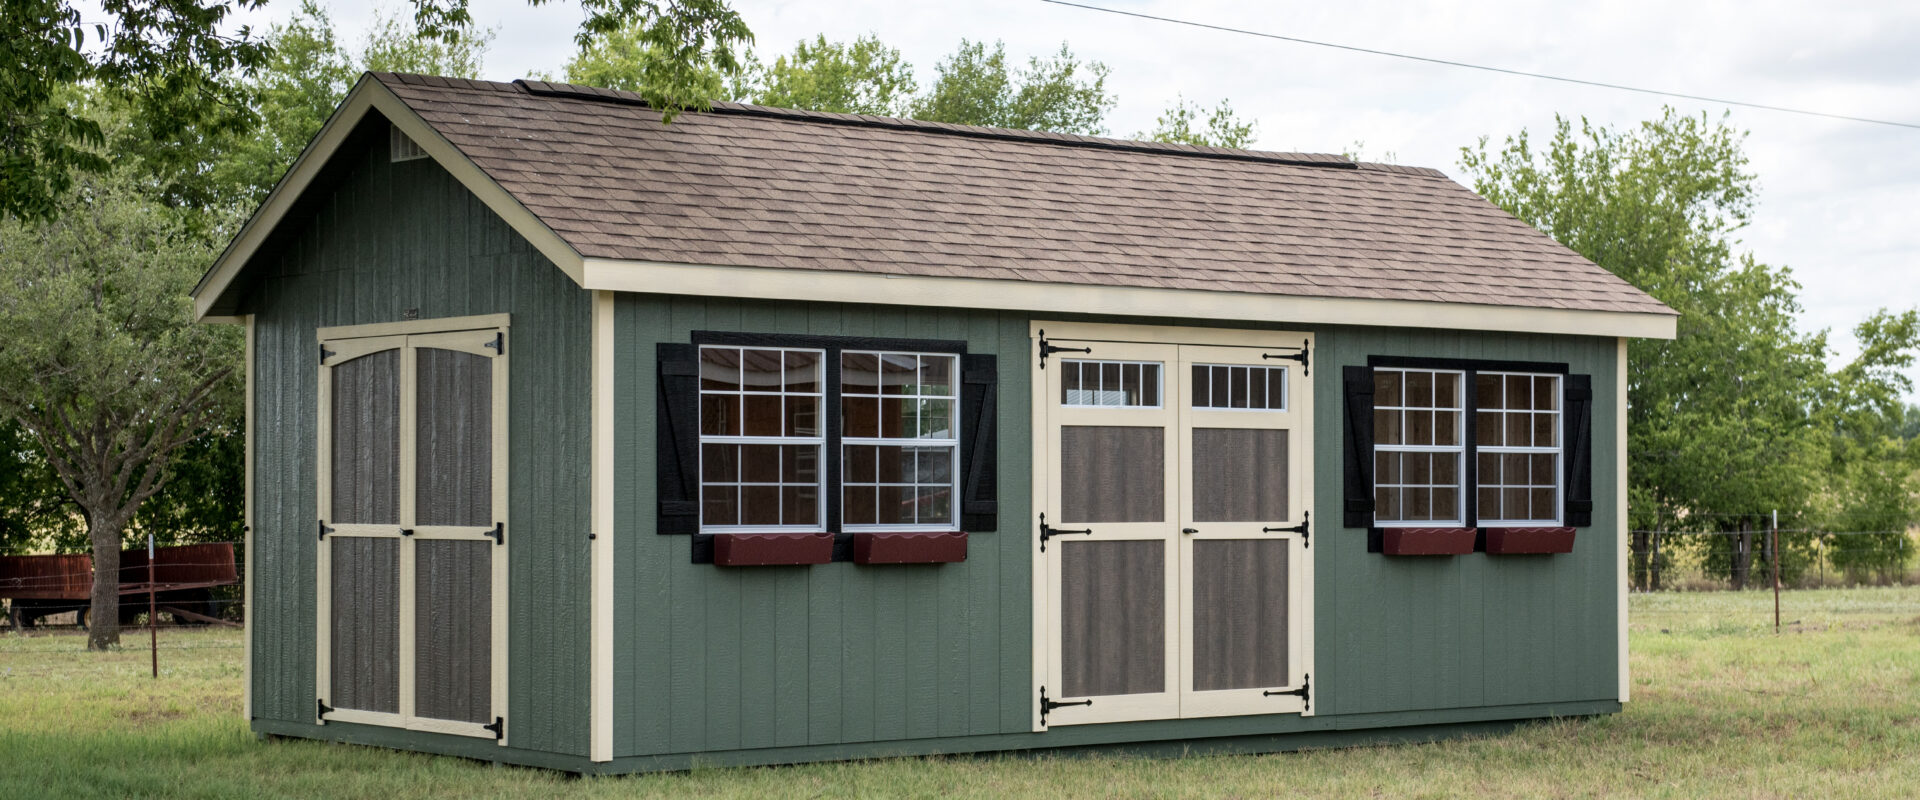 classic storage shed for sale in texas